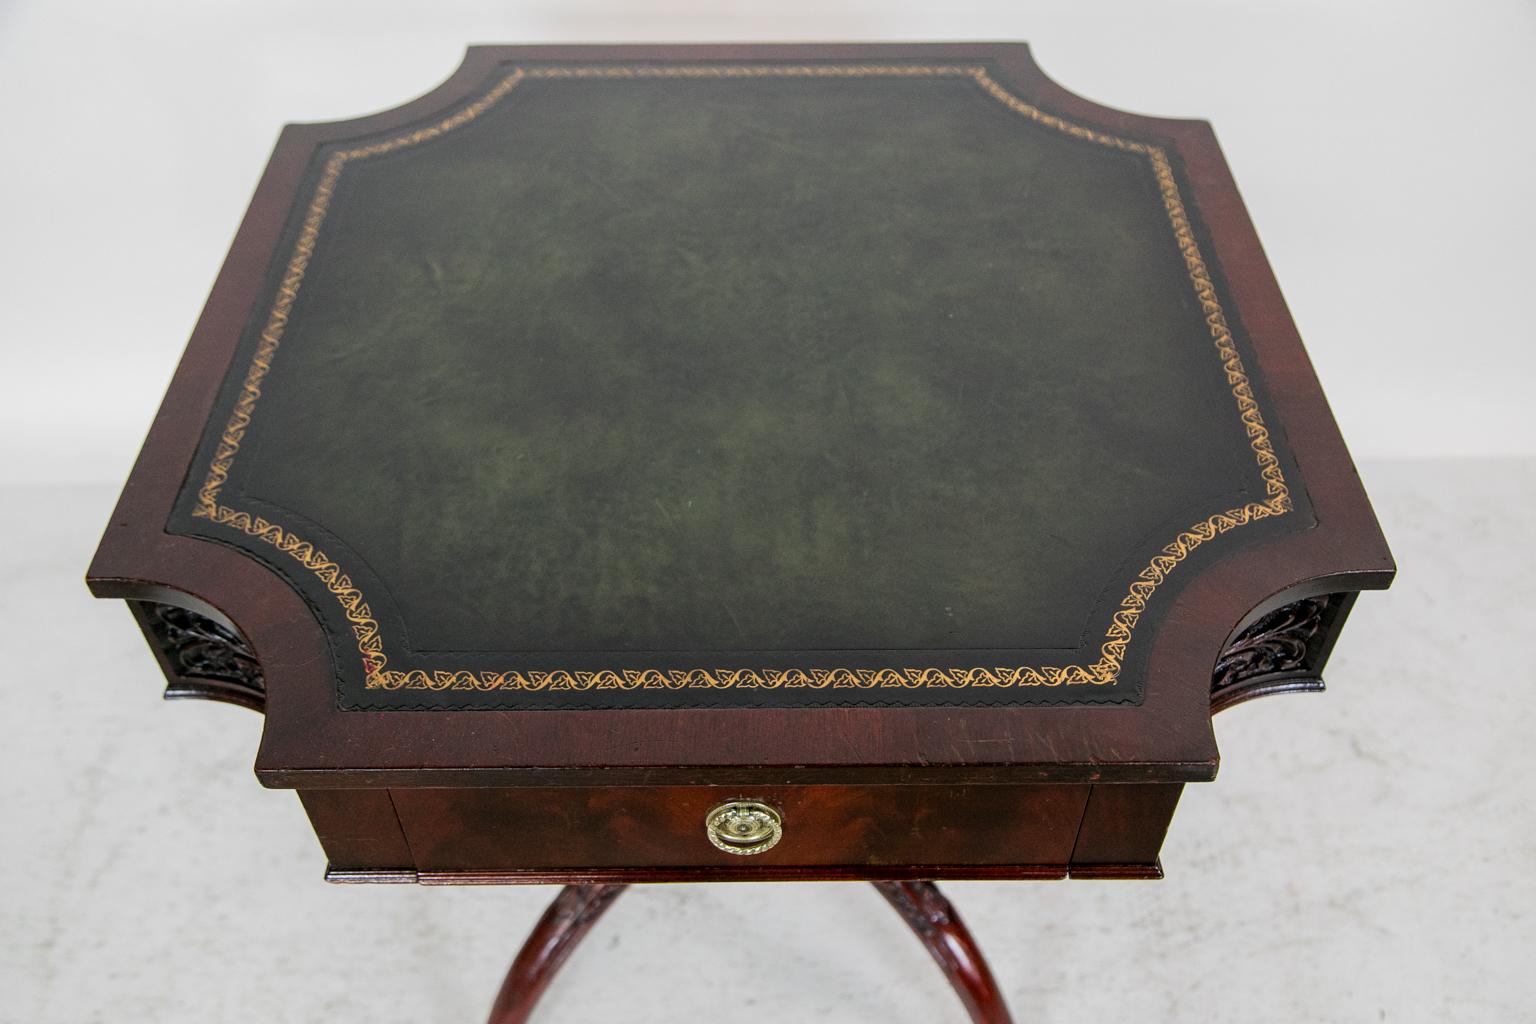 This American center table has a reverse quatrefoil shape. The concave corners of the apron are carved with stylized Prince of Wales plumes. The four arched legs are carved with stylized acanthus leaves and bell flowers. The green leather top has a